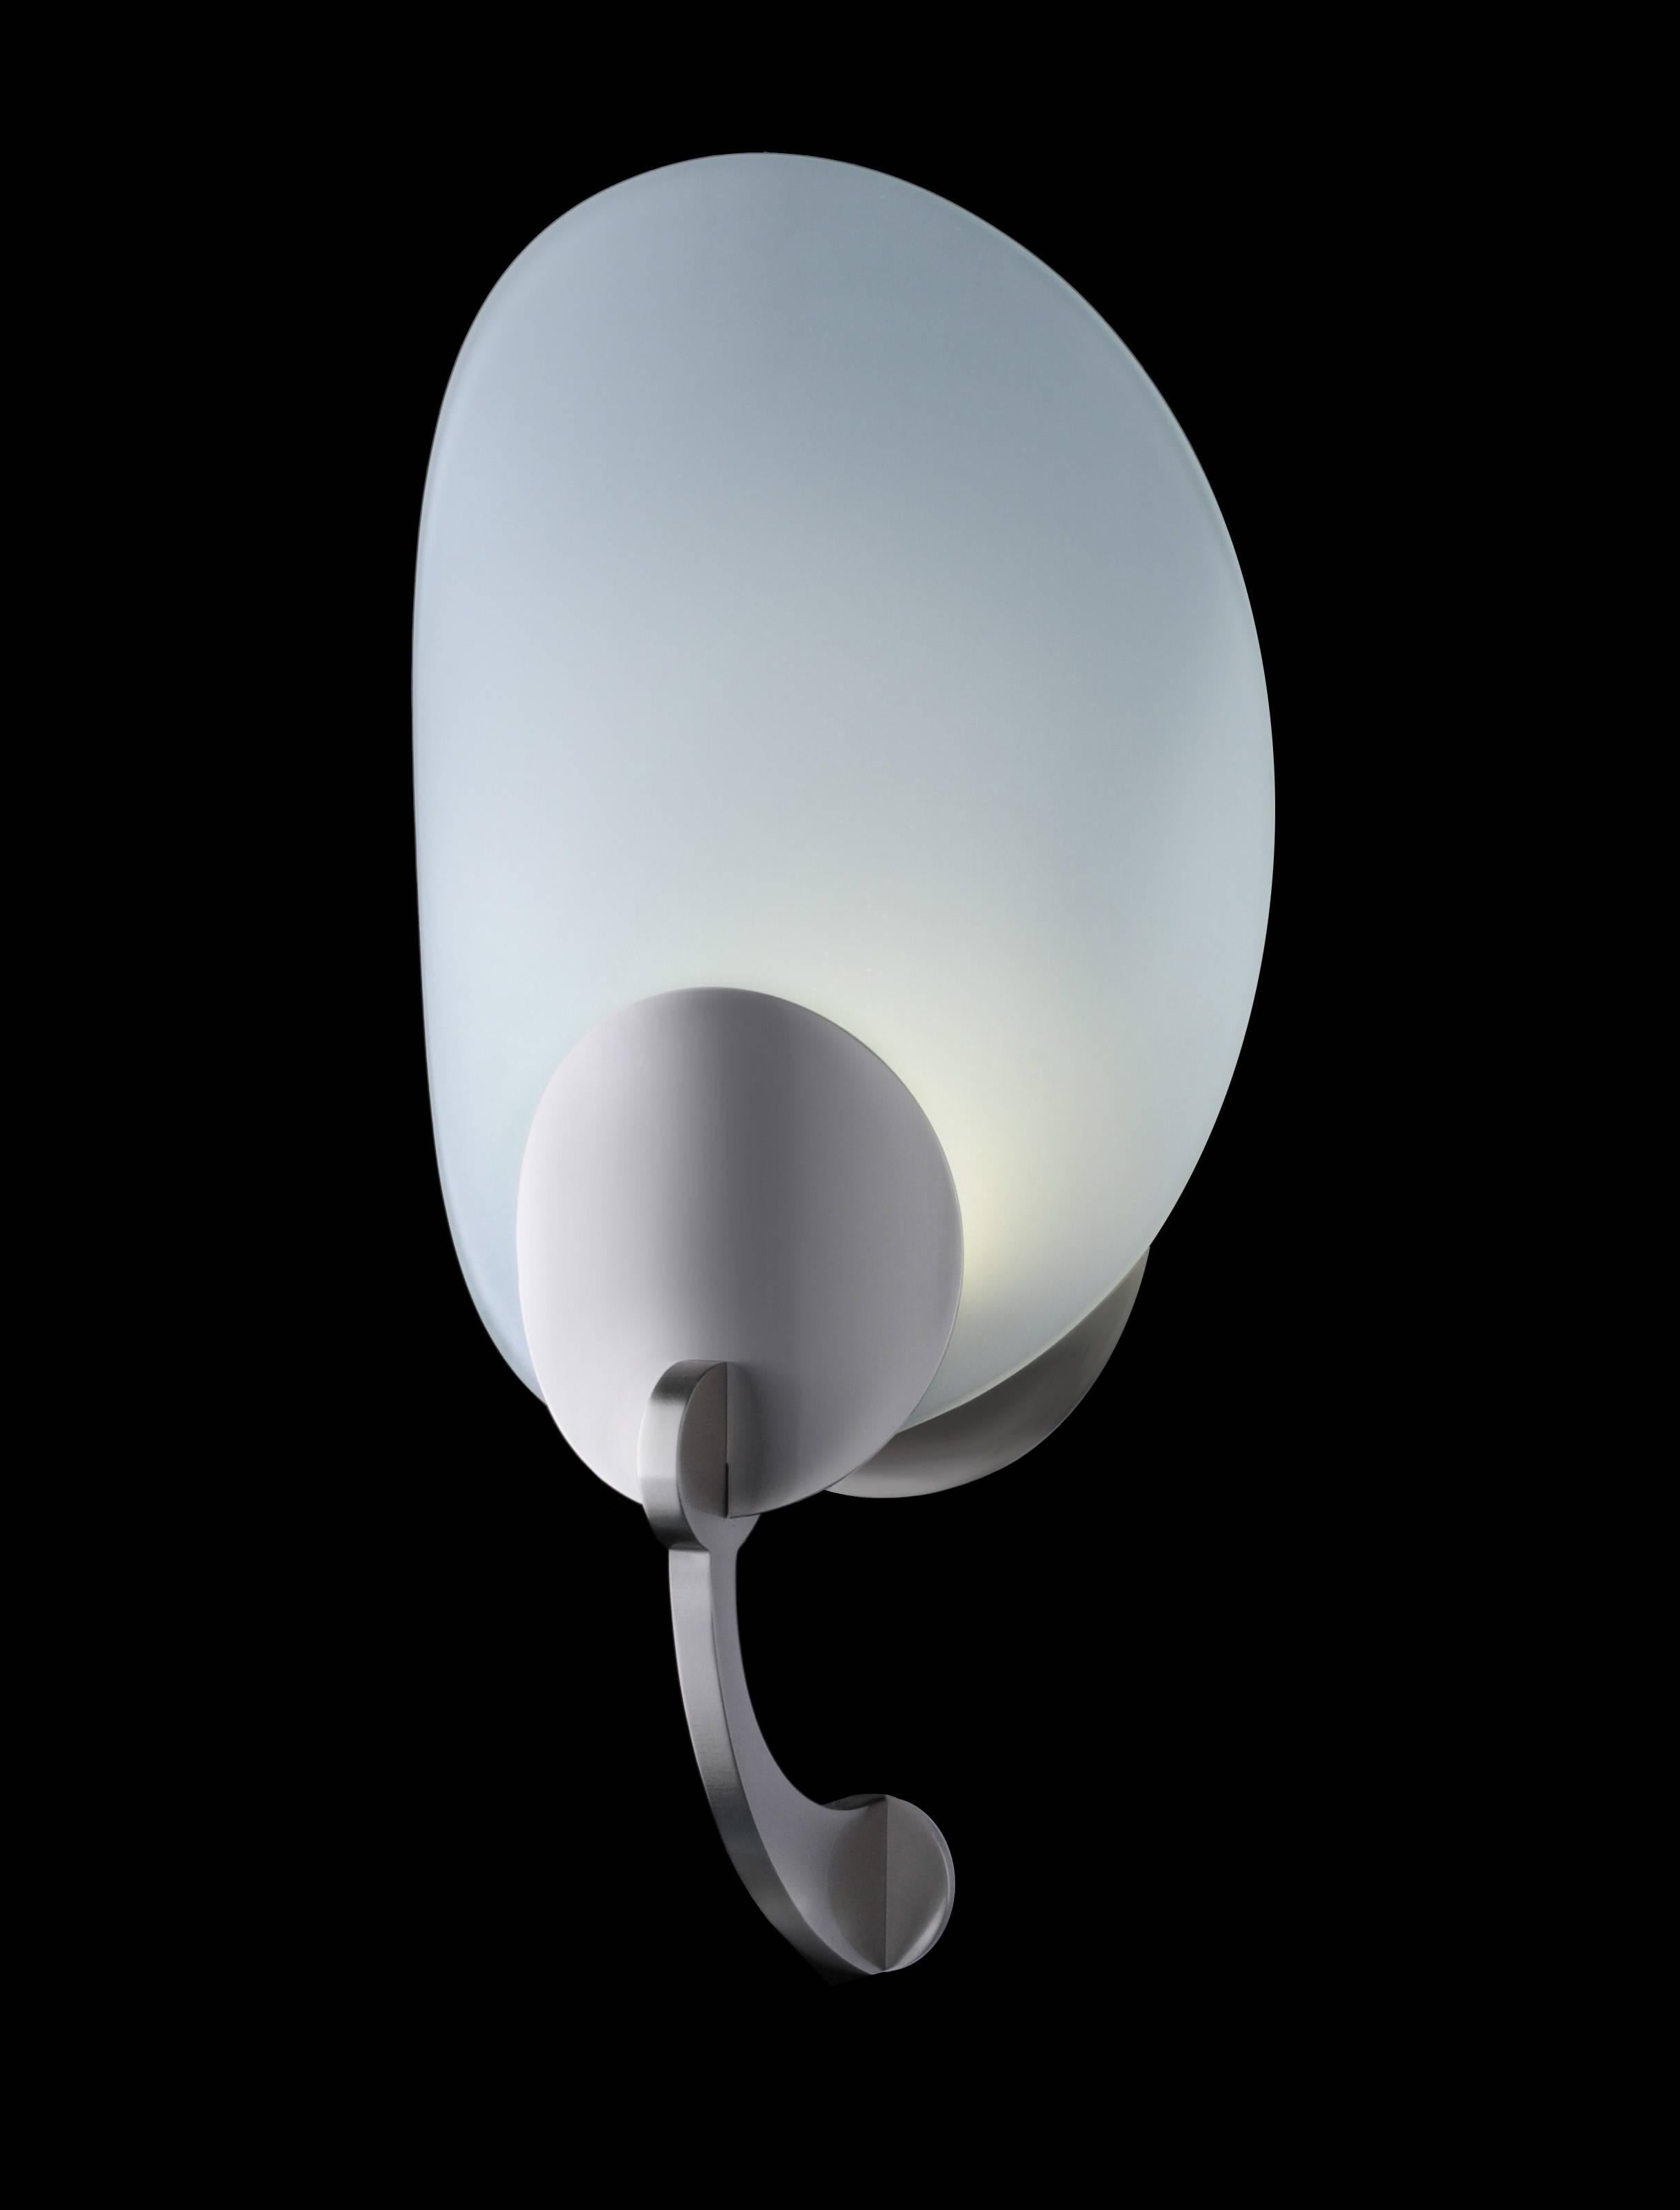 Clear frosted curved glass wall sconce. Round cast aluminium details and lower support arm. In the manner of Streamline Modern. LED lamping, 3000k standard color temperature.

Architect, Sandy Littman of Duesenberg LTD.  and The American Glass Light